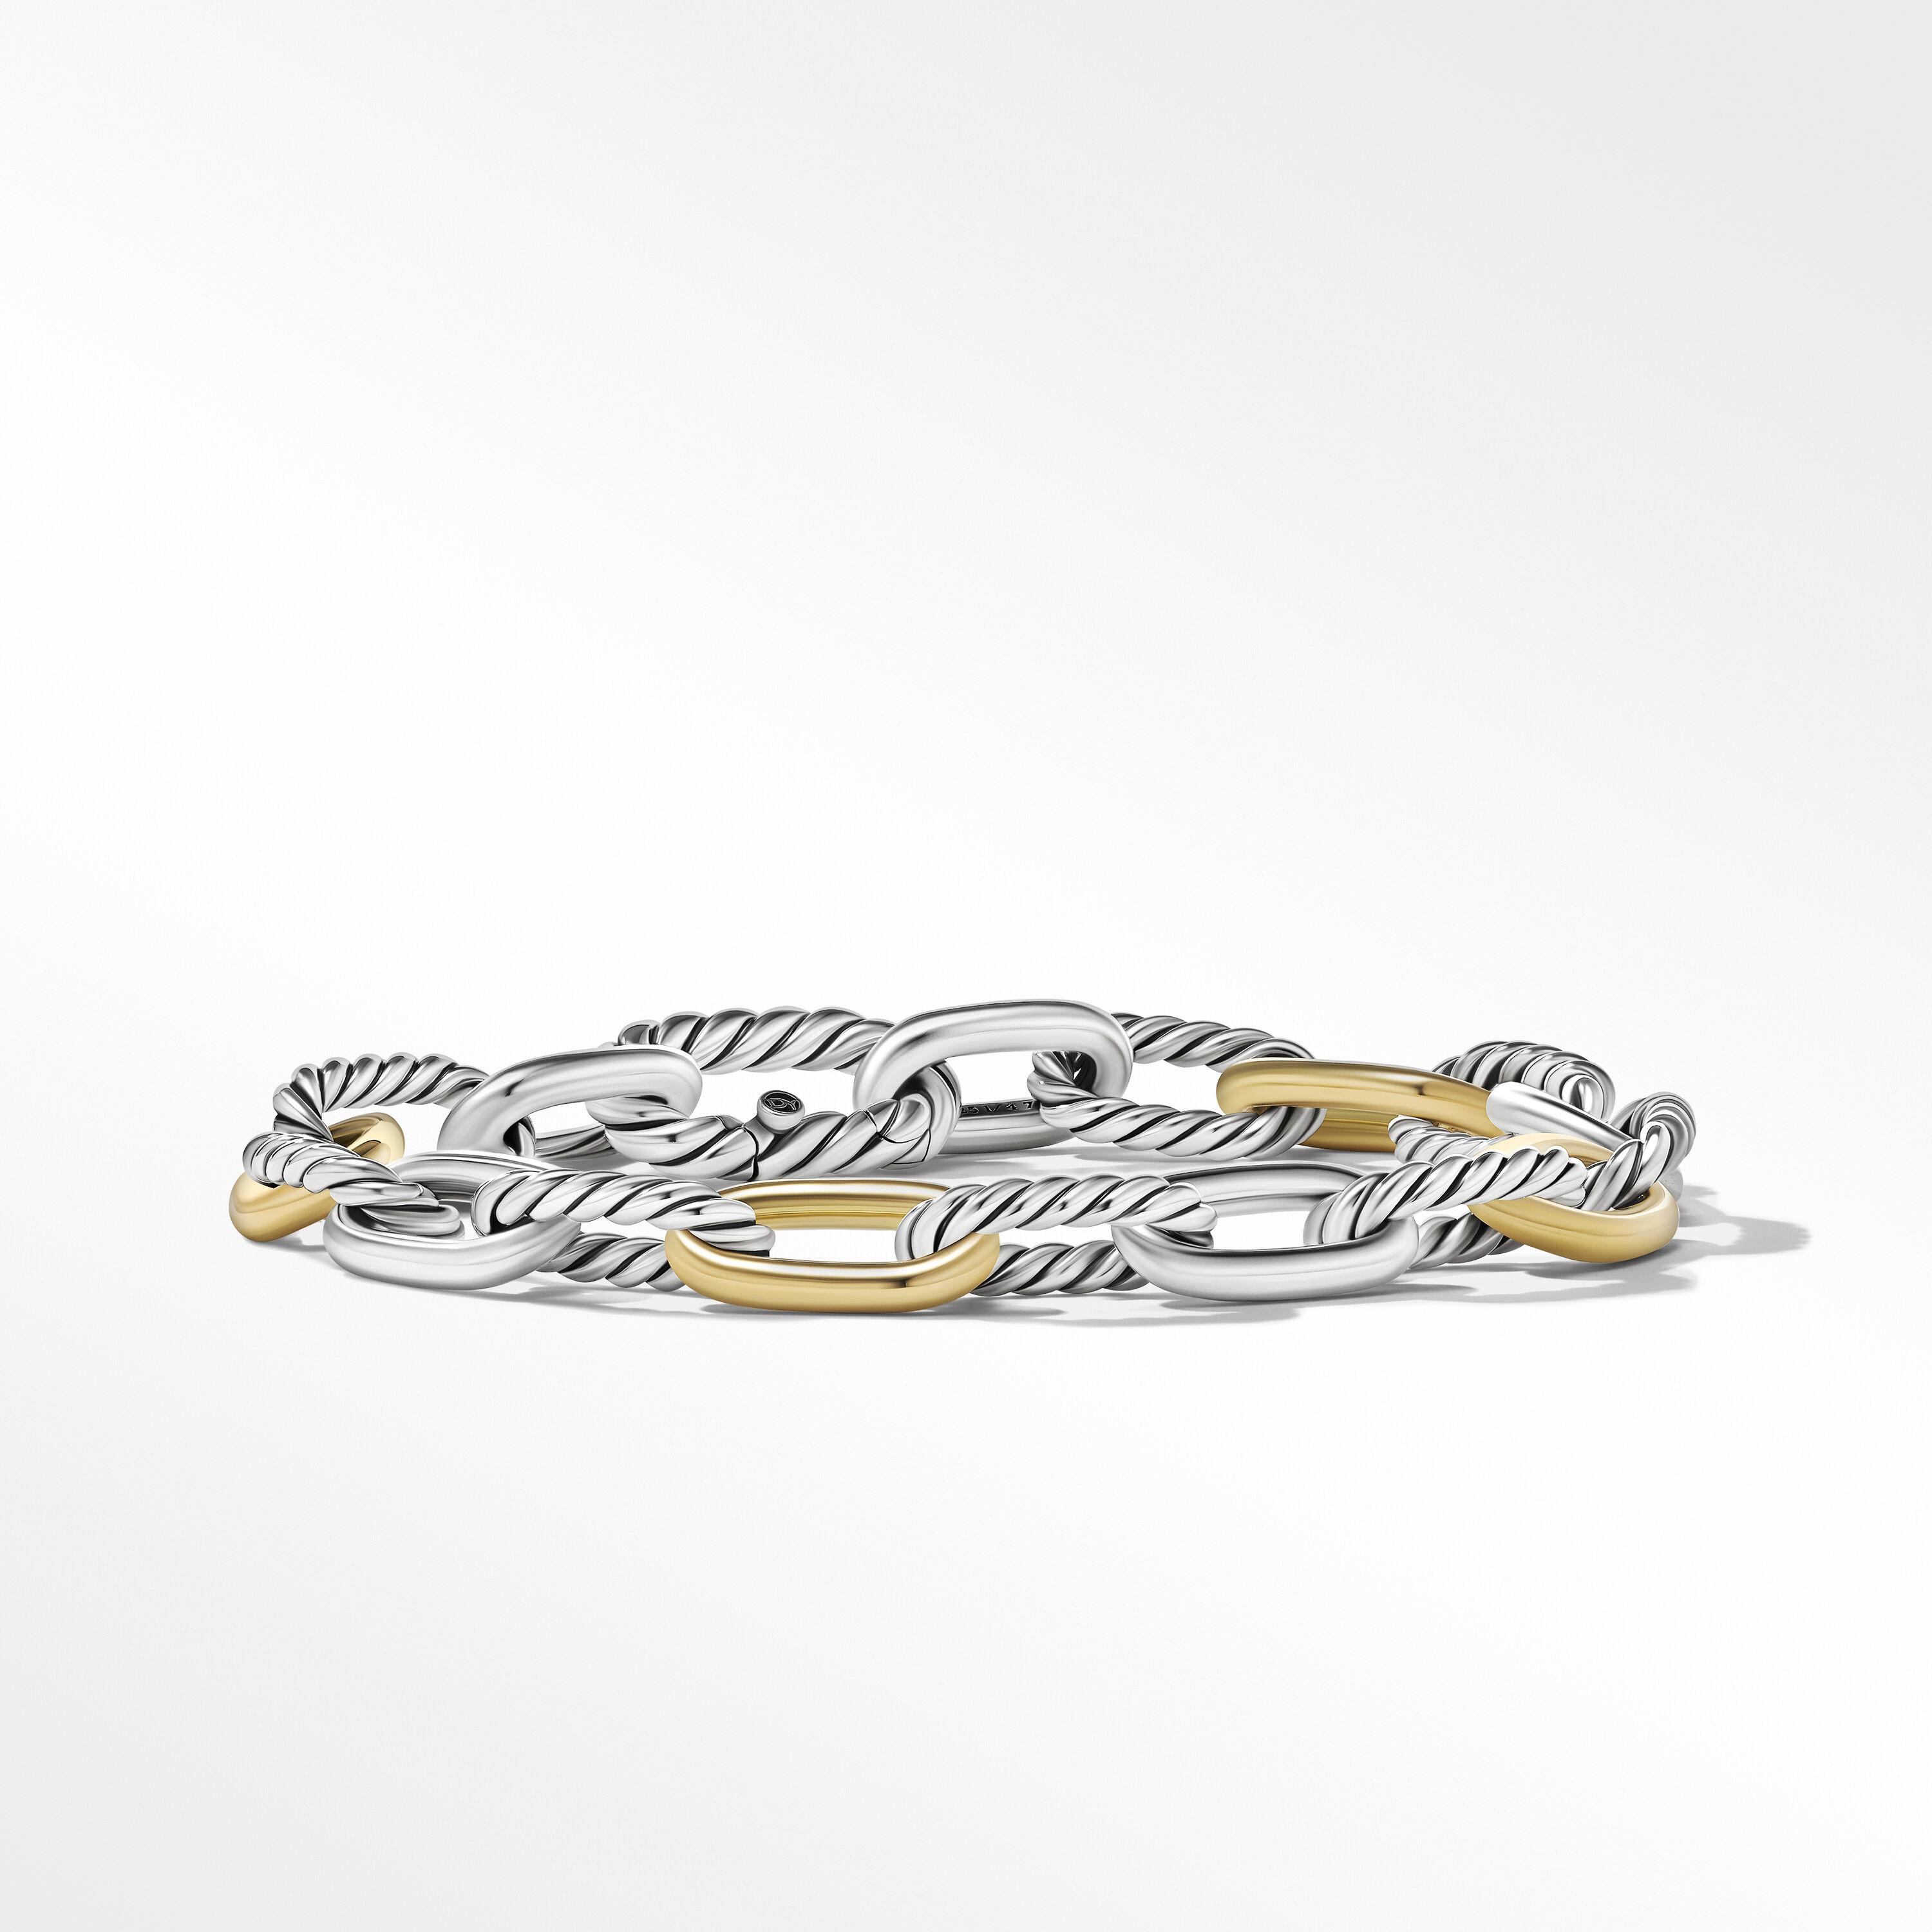 David Yurman DY Madison Chain 8.5mm Bracelet in Sterling Silver with 18k Yellow Gold, size medium